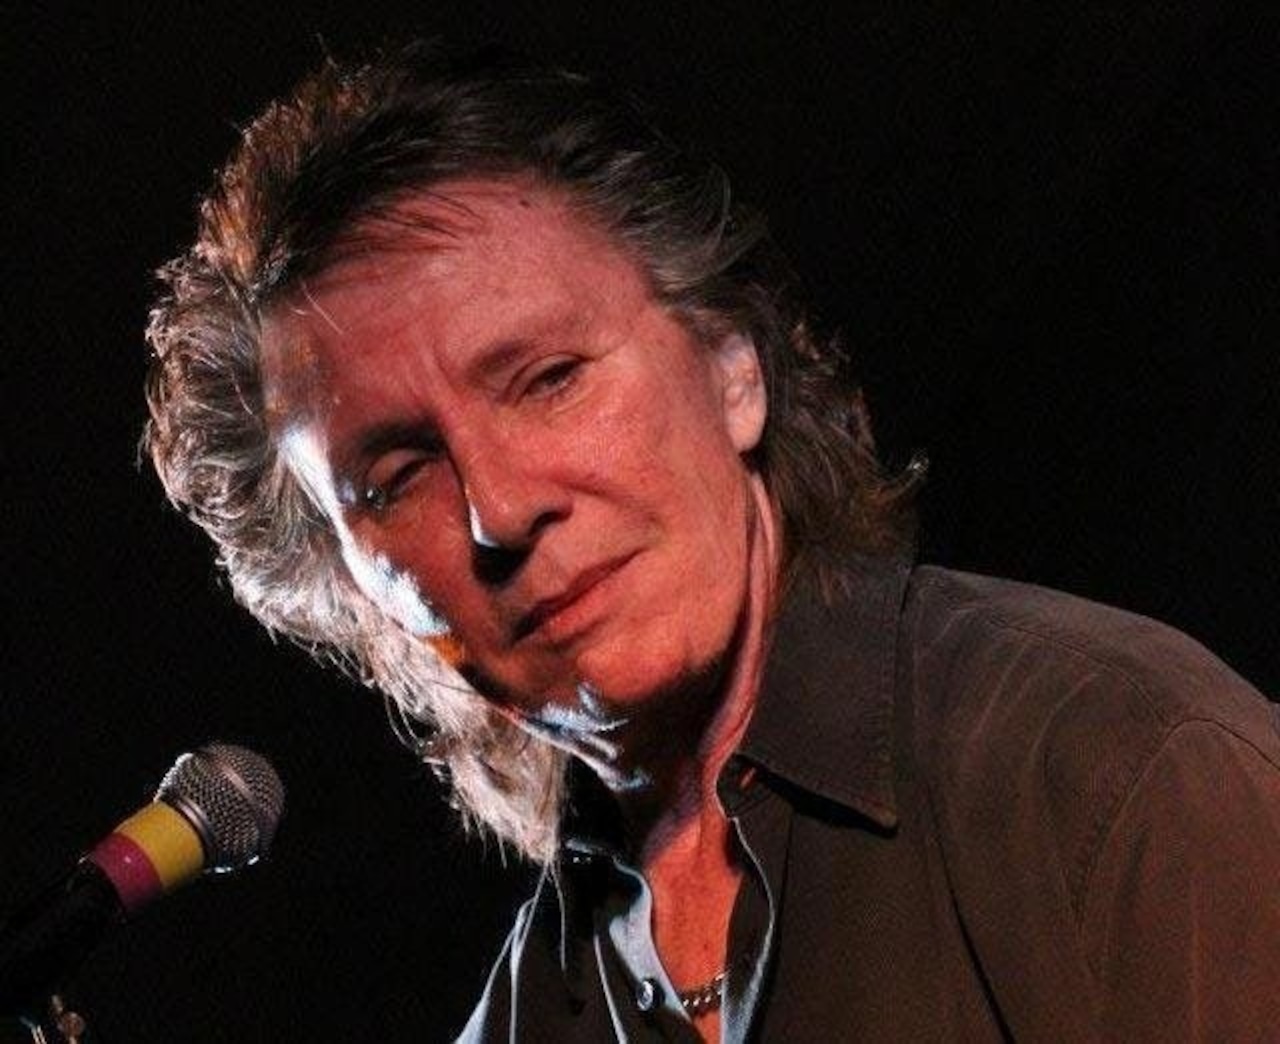 Benny Mardones on drugs, recovery and how CNY helped him get clean [Video]